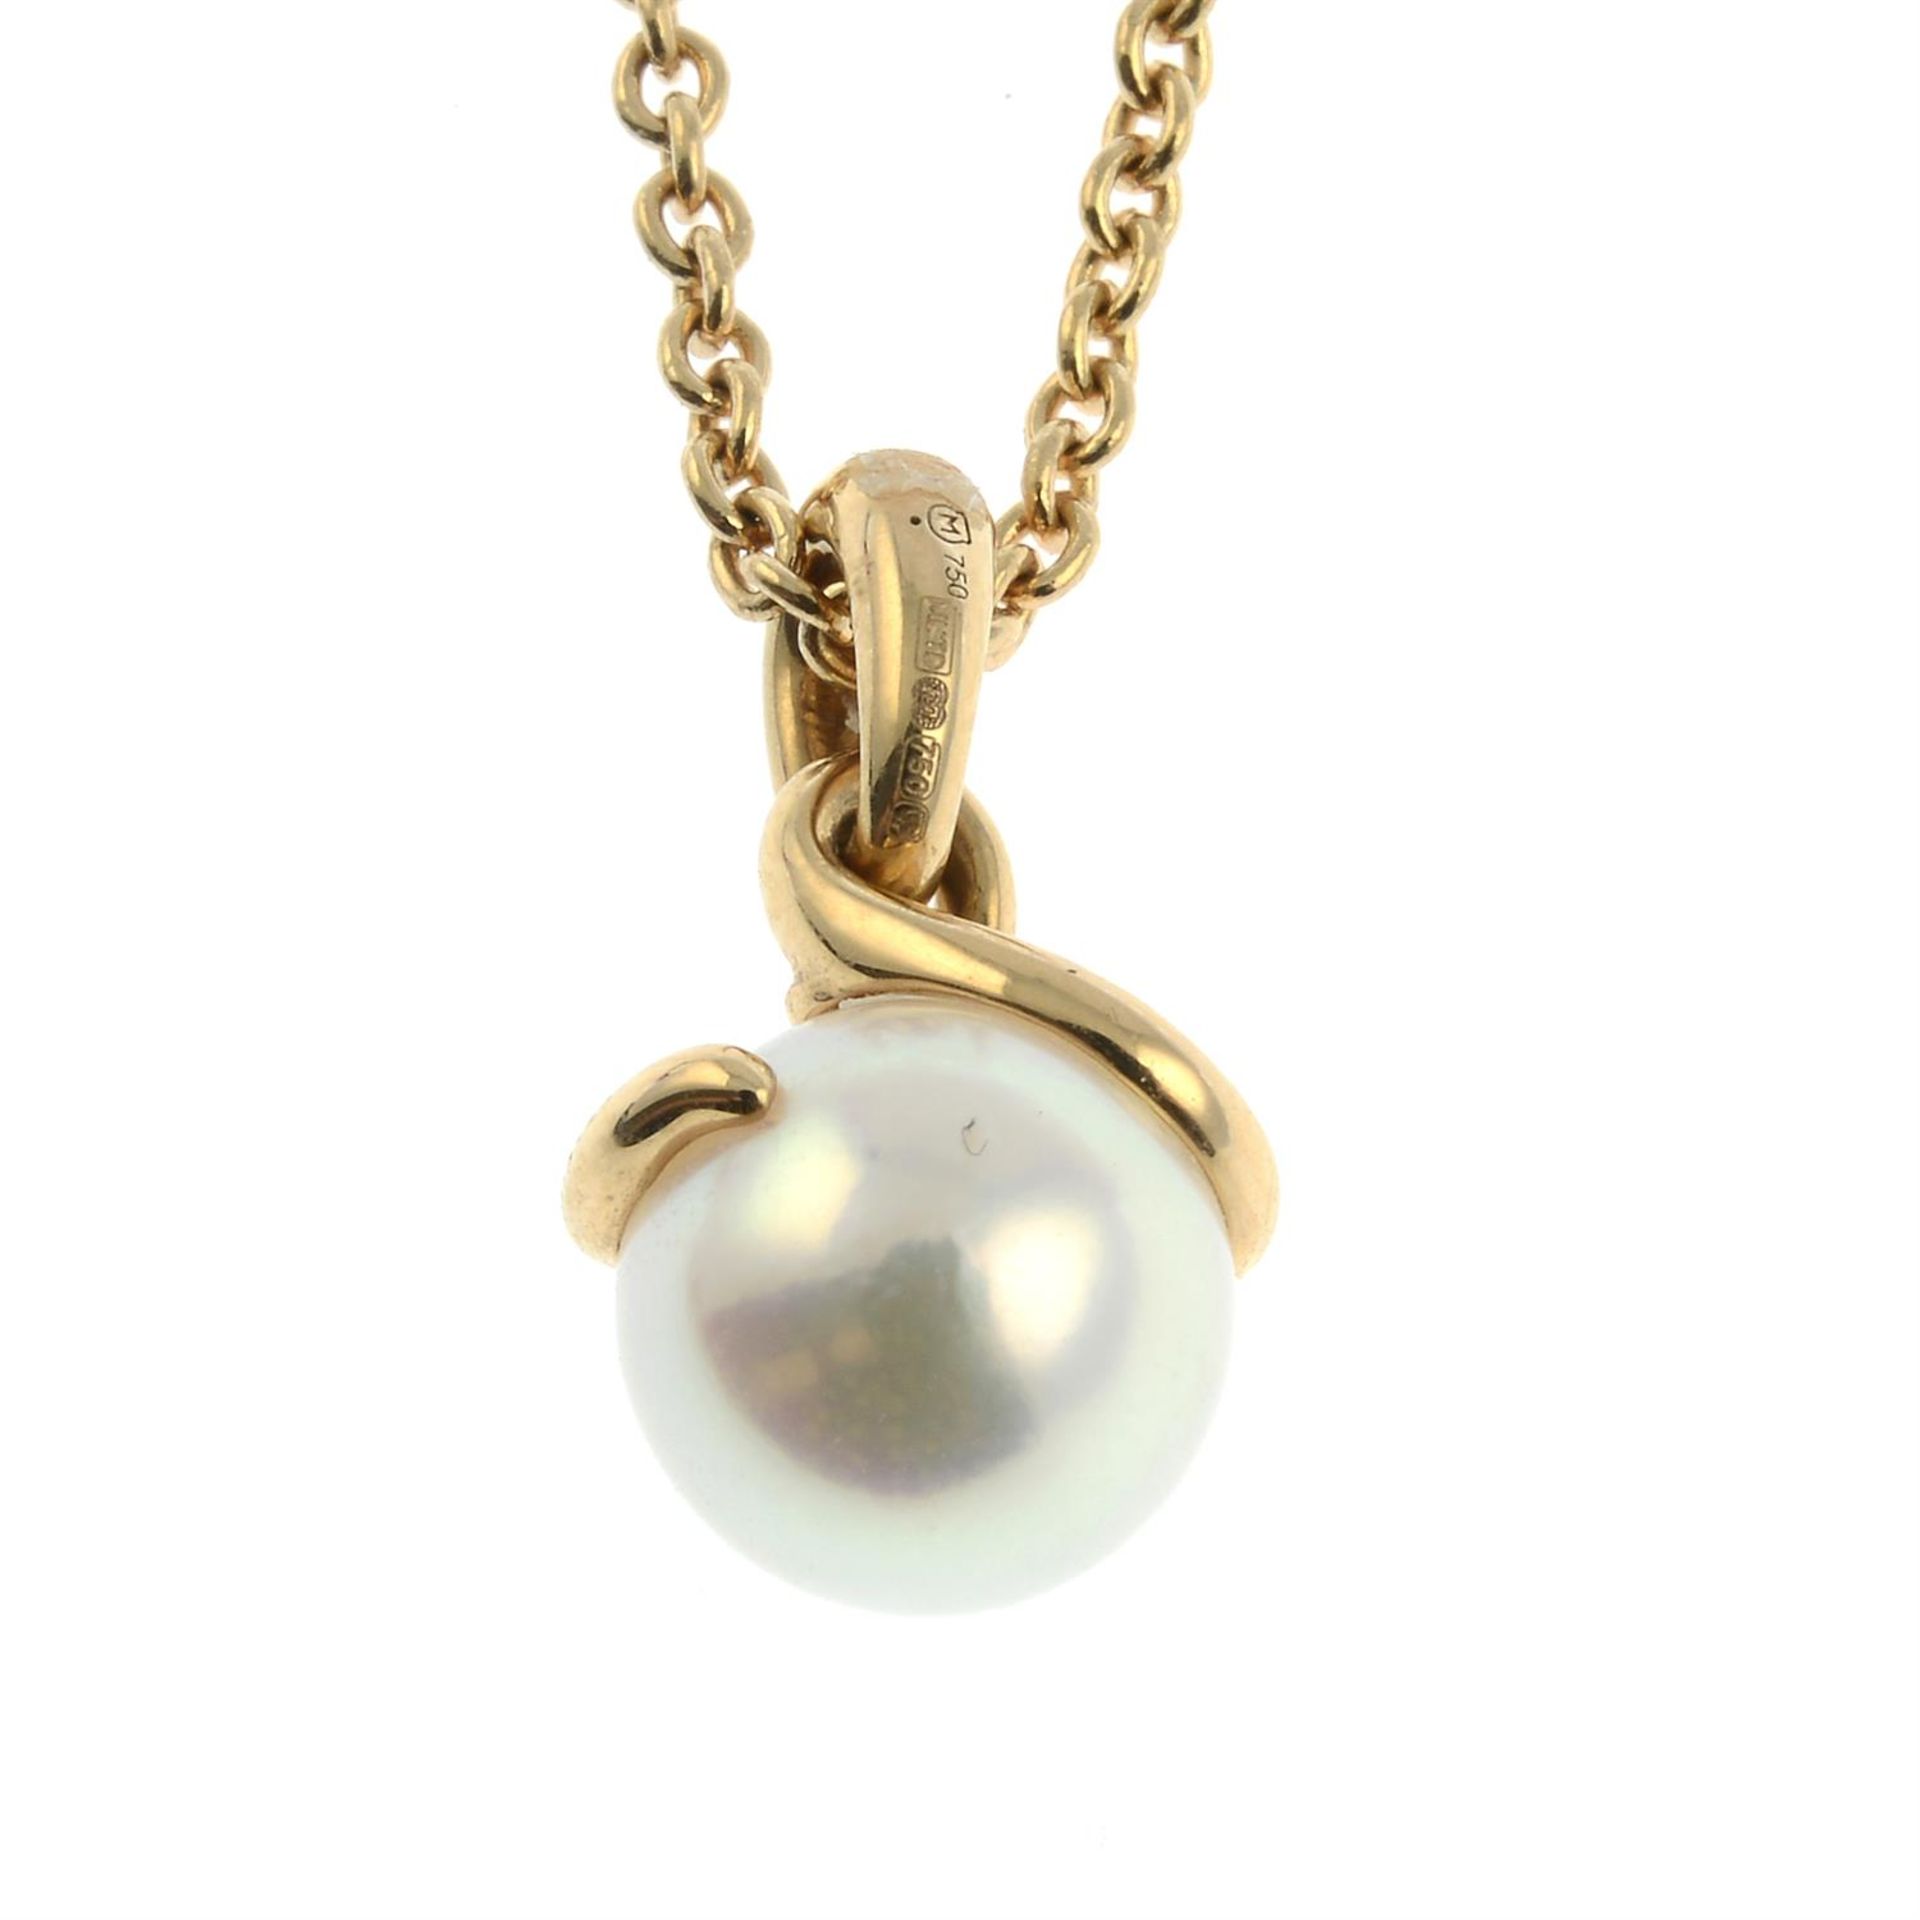 An 18ct gold Akoya cultured pearl and pavé-set diamond 'Twist' pendant, with chain, by Mikimoto. - Image 3 of 5